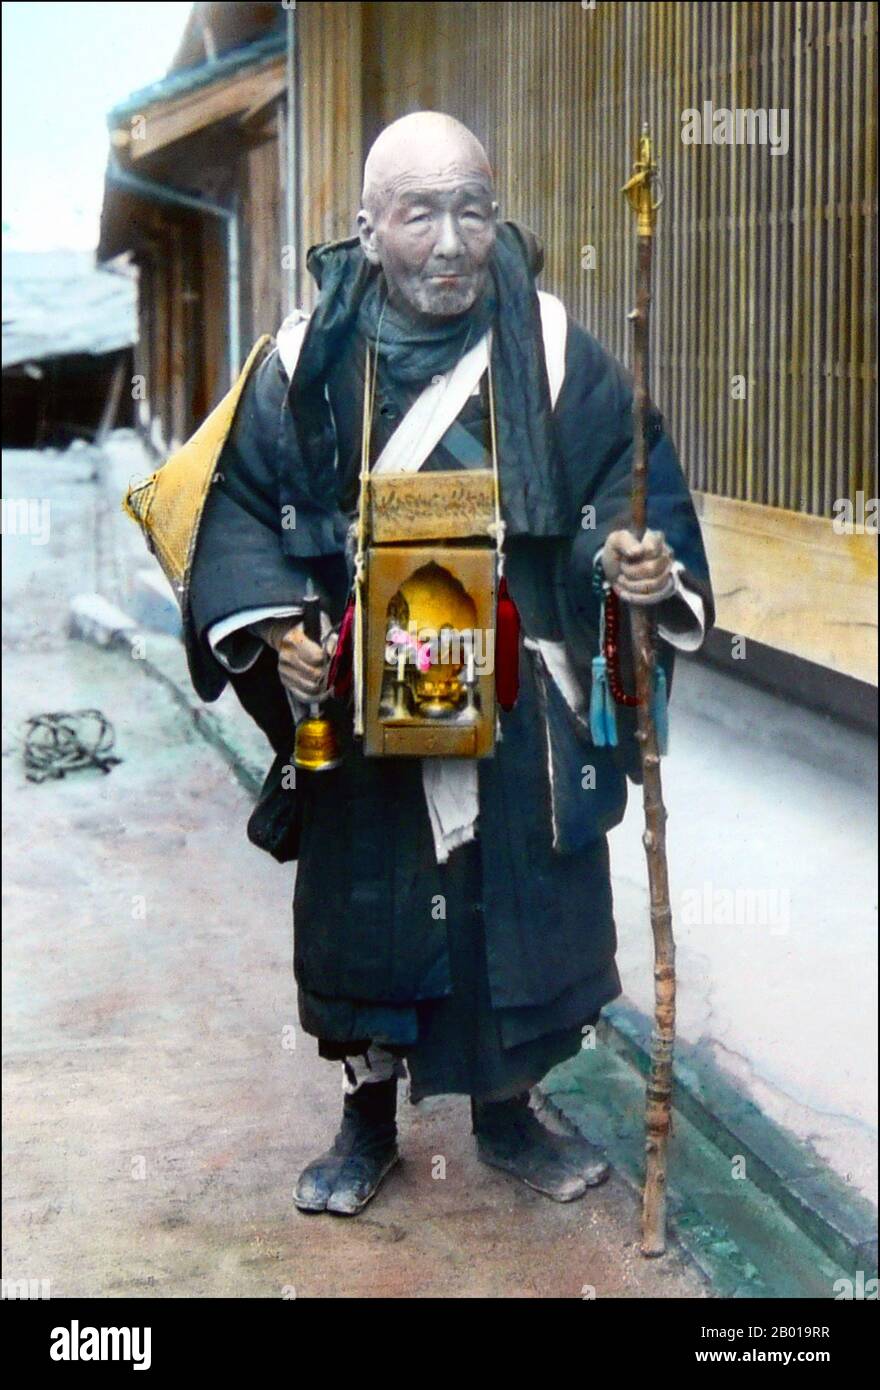 Japan: A mendicant pilgrim carrying a bell and a portable shrine around his neck. Photo by T. Enami (1859-1929), 1890s.  T. Enami (Enami Nobukuni) was the trade name of a celebrated Meiji period photographer. The T. of his trade name is thought to have stood for Toshi, though he never spelled it out on any personal or business document.  Born in Edo (now Tokyo) during the Bakumatsu era, Enami was first a student of, and then an assistant to the well known photographer and collotypist, Ogawa Kazumasa. Enami relocated to Yokohama, and opened a studio on Benten-dōri (Benten Street) in 1892. Stock Photo